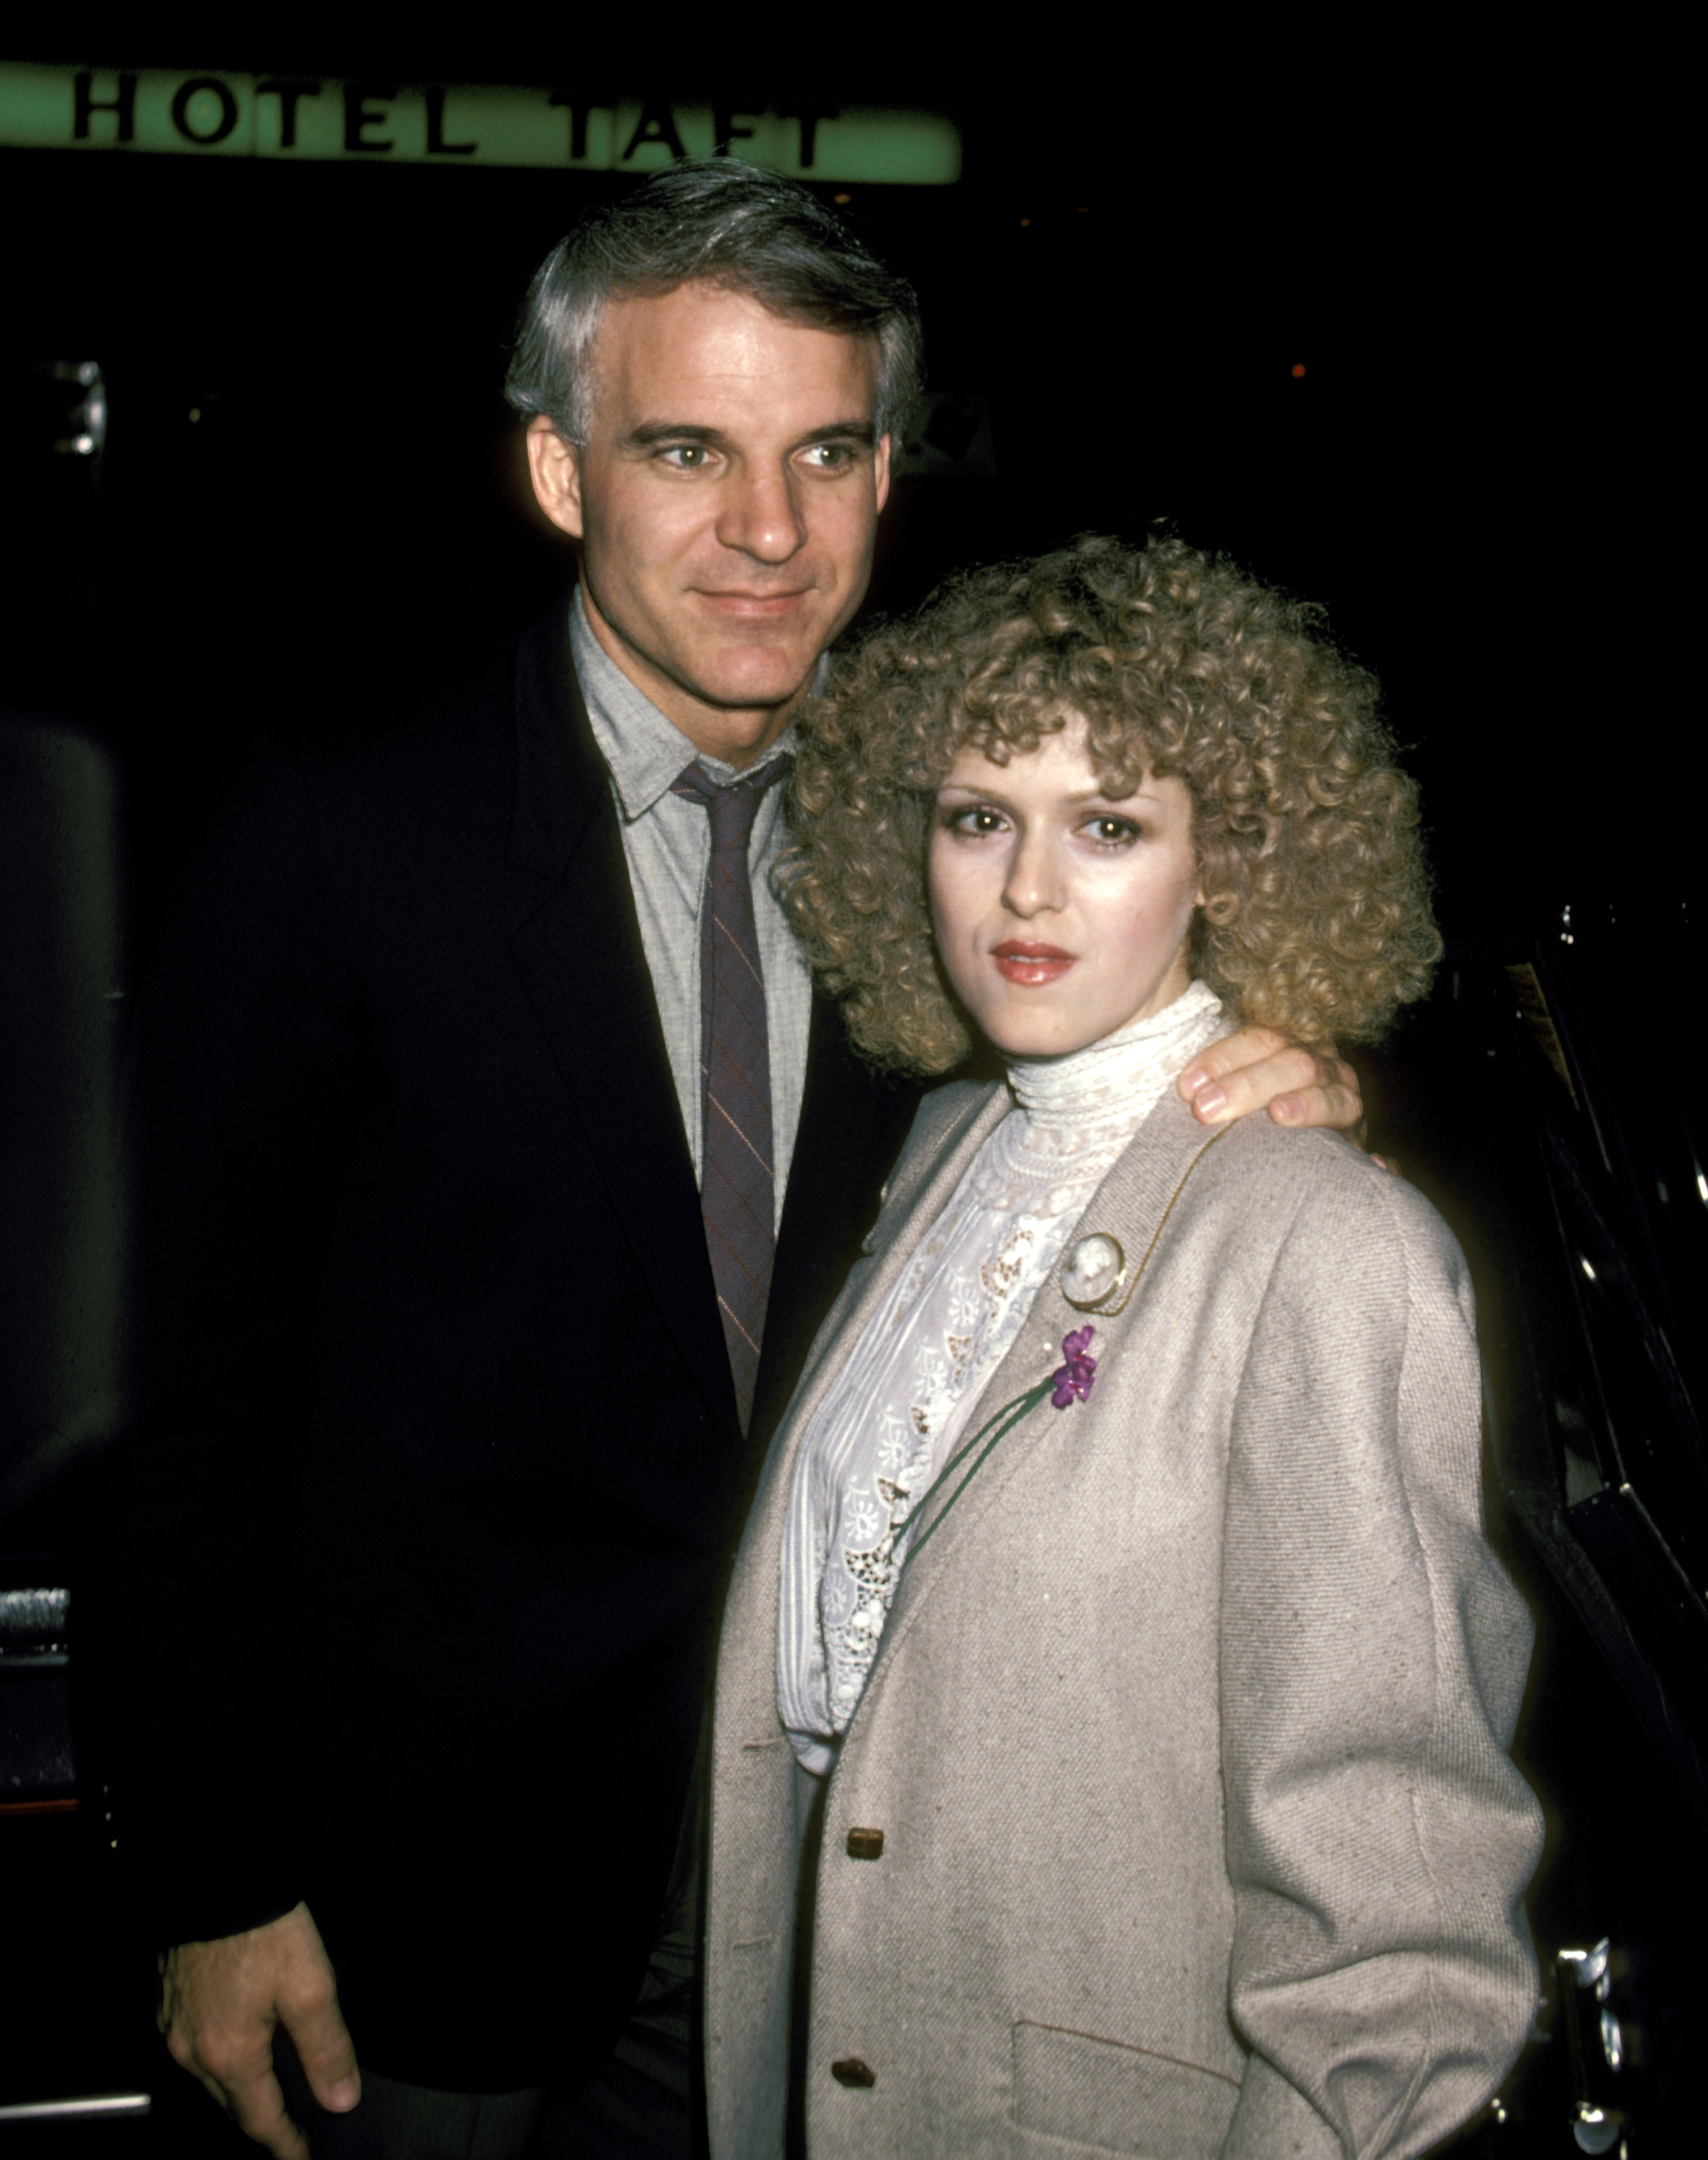 Steve Martin and Bernadette Peters are pictured during the performance of "42nd Street" | Source: Getty Images